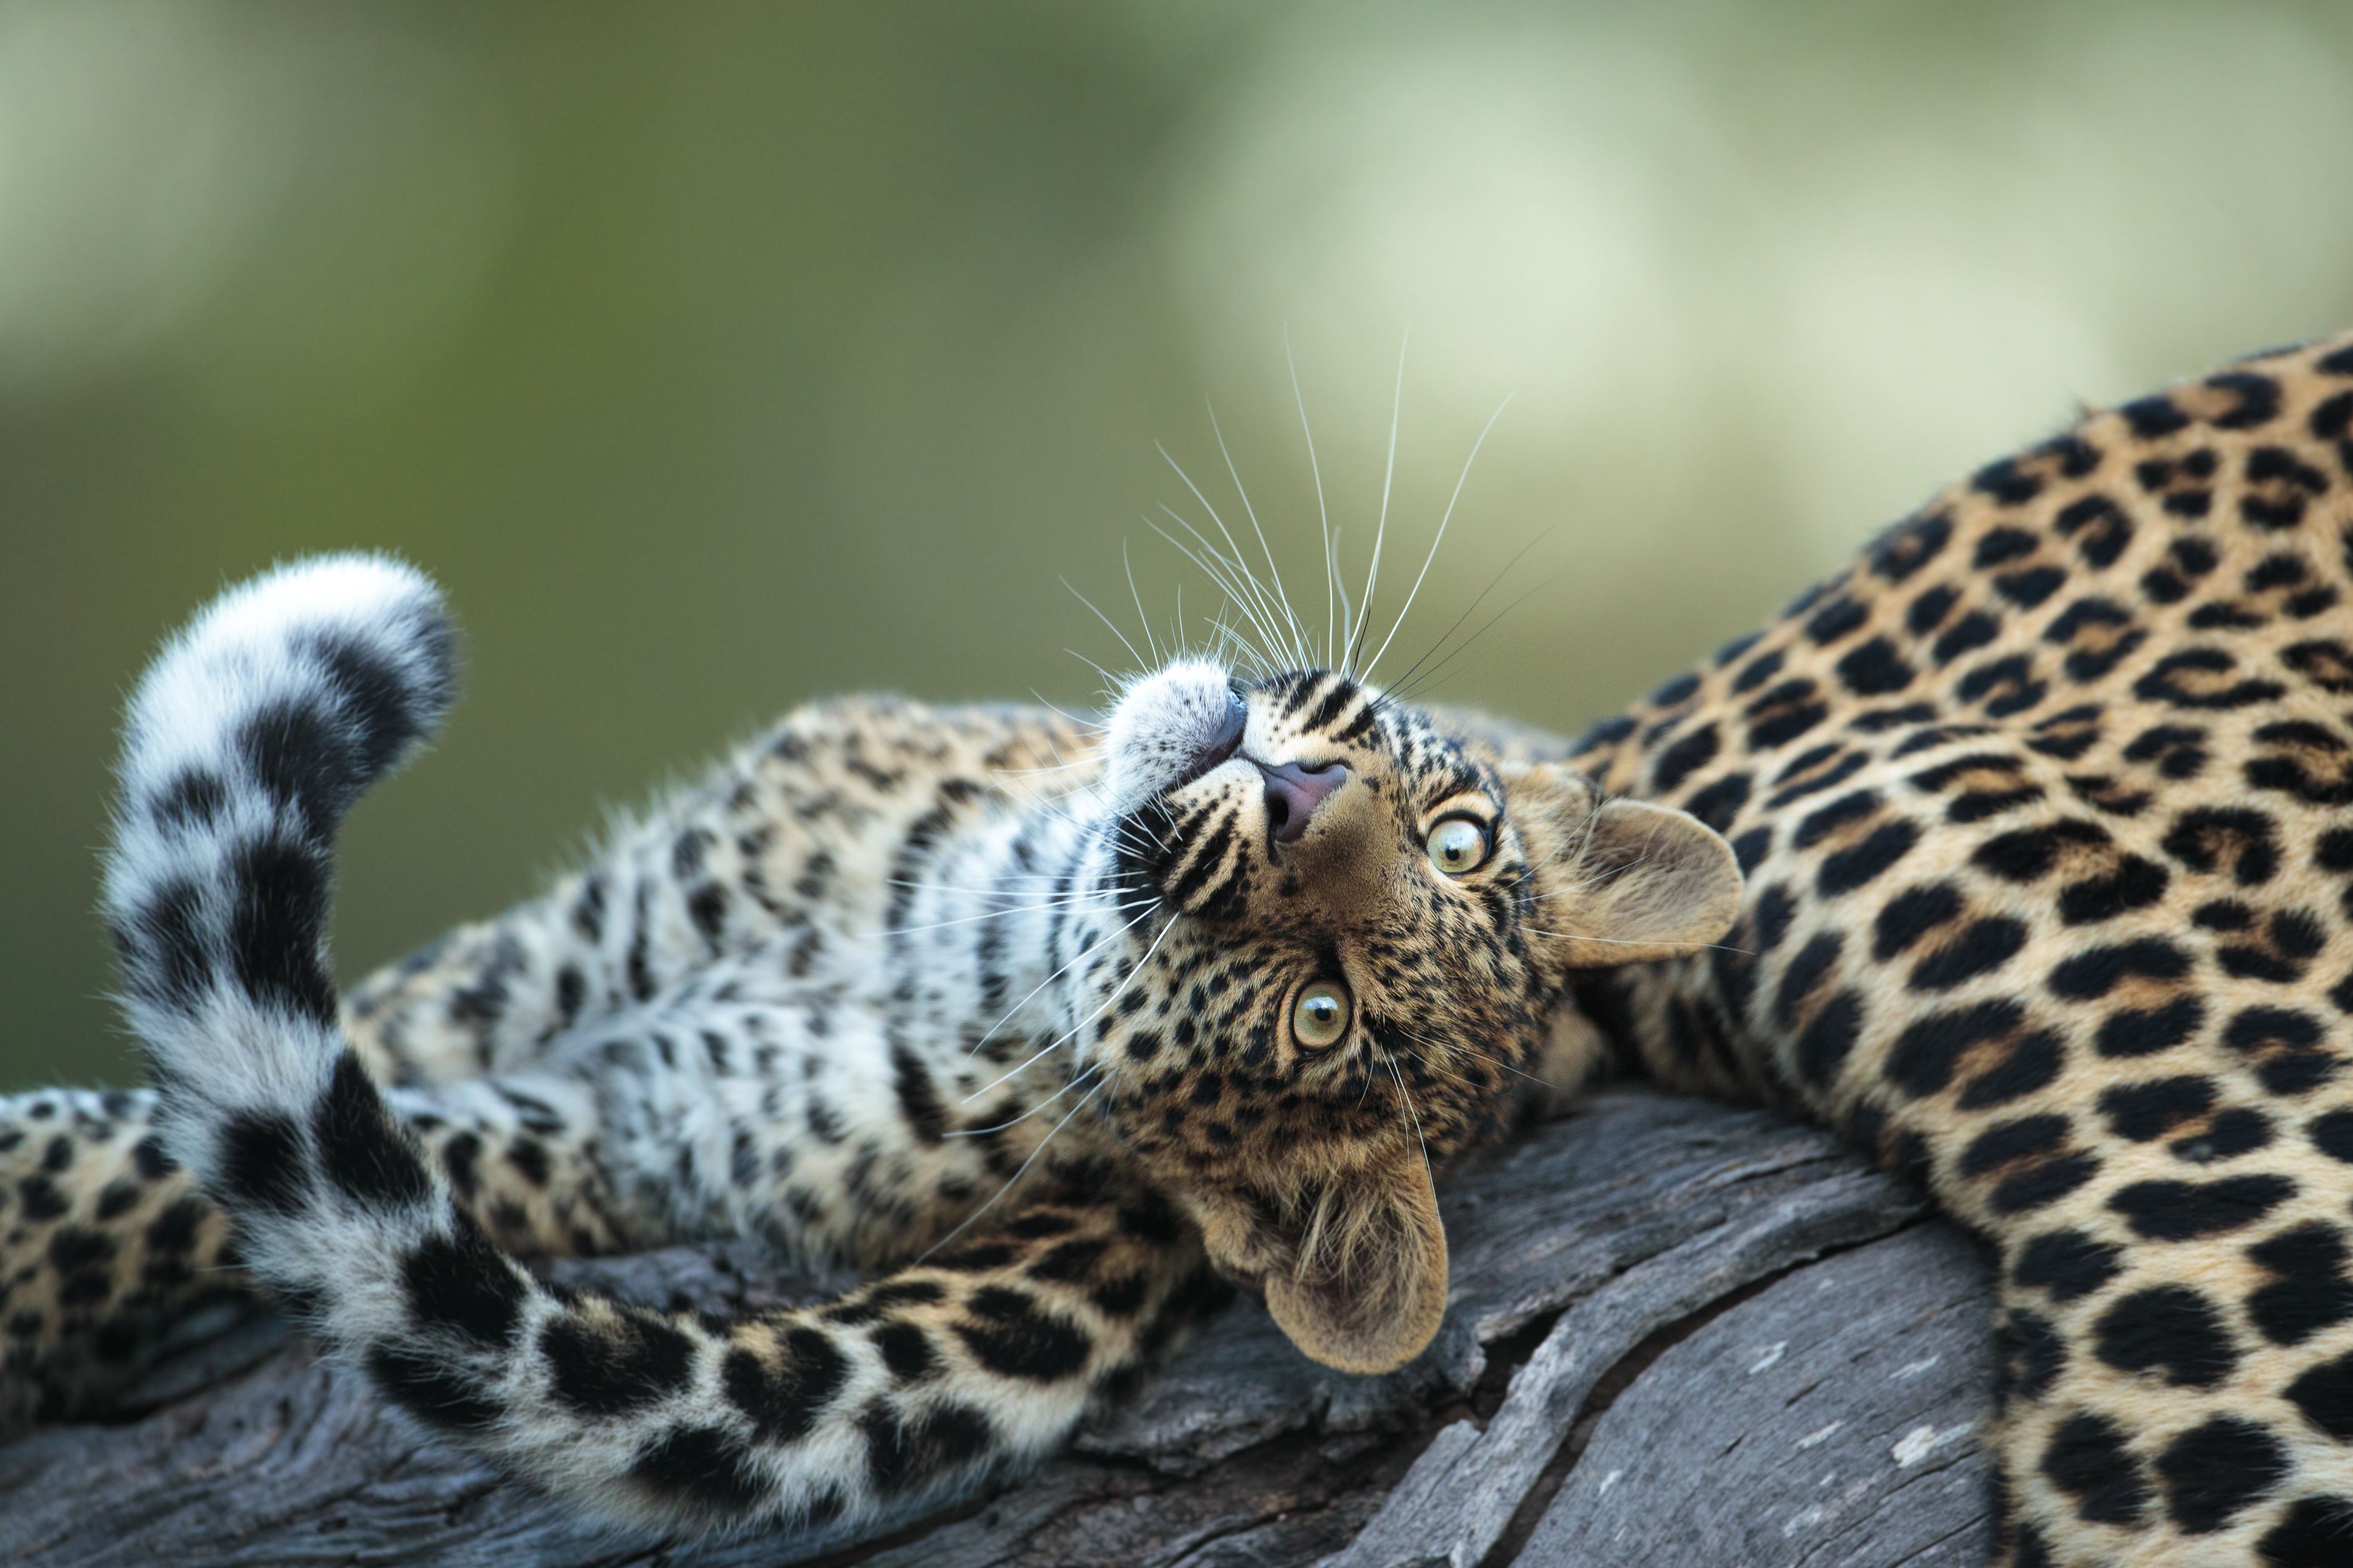 Remembering Leopards': A book of photography is helping to save